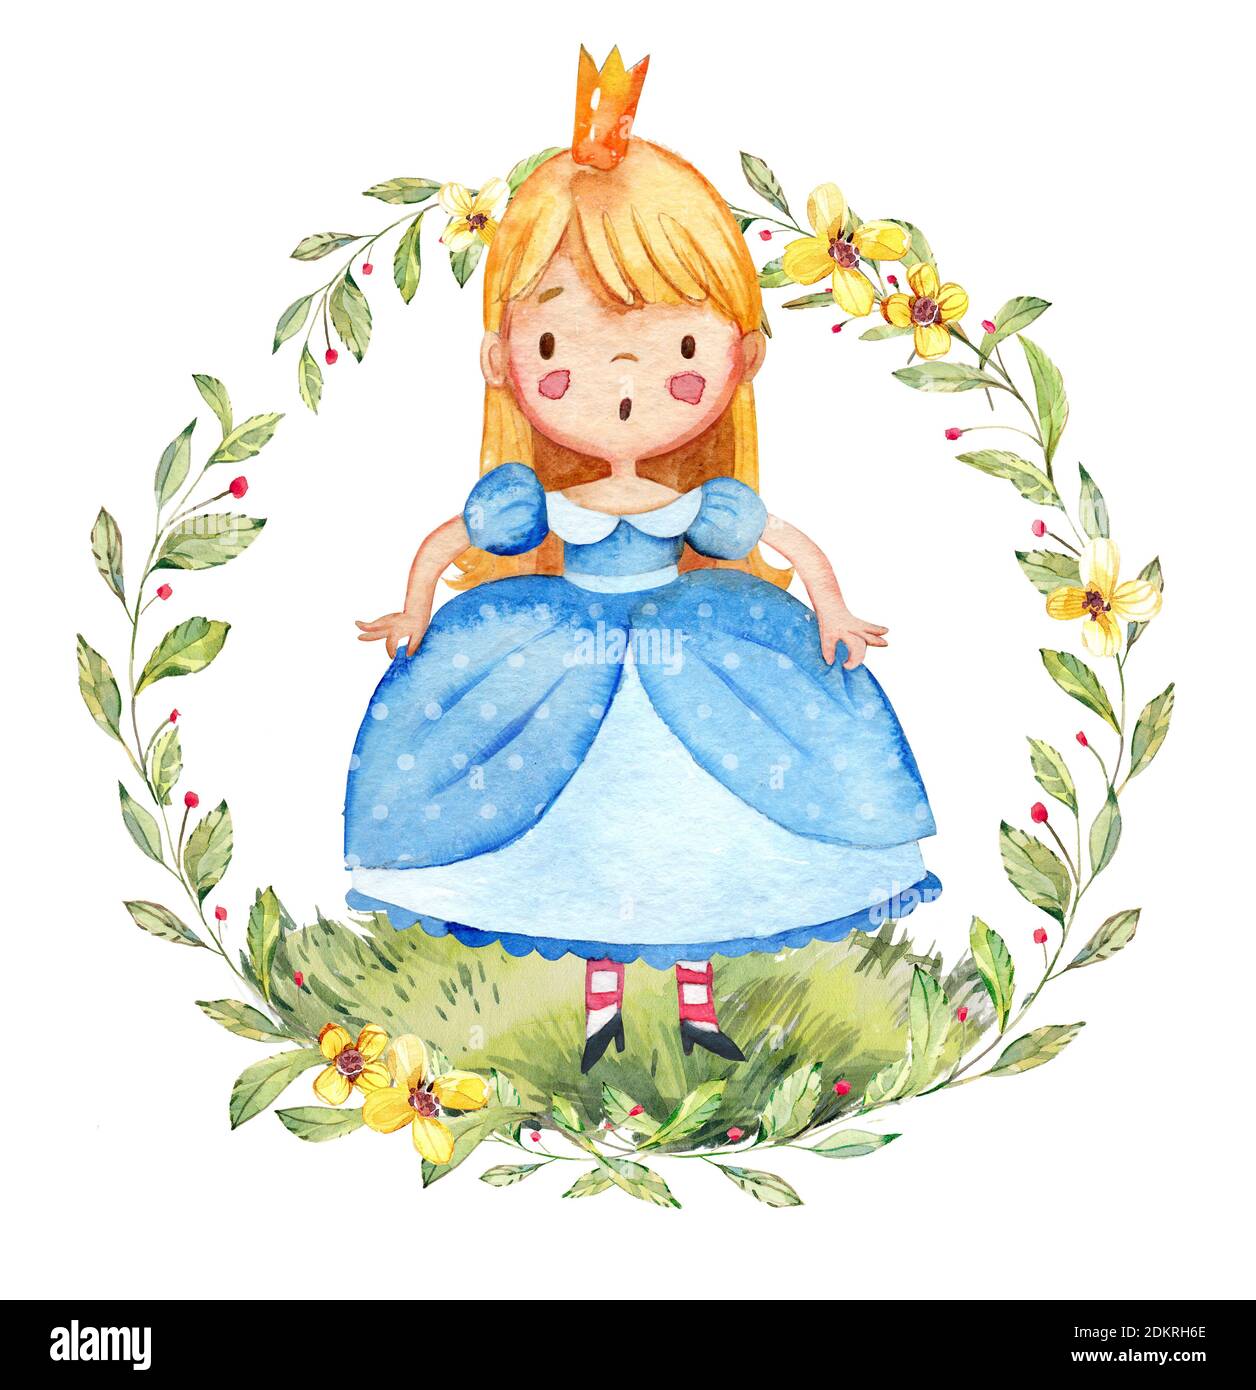 Watercolor illustration of a cute little princess in a blue dress. Little girl surrounded by watercolor wreath. Isolated. Stock Photo